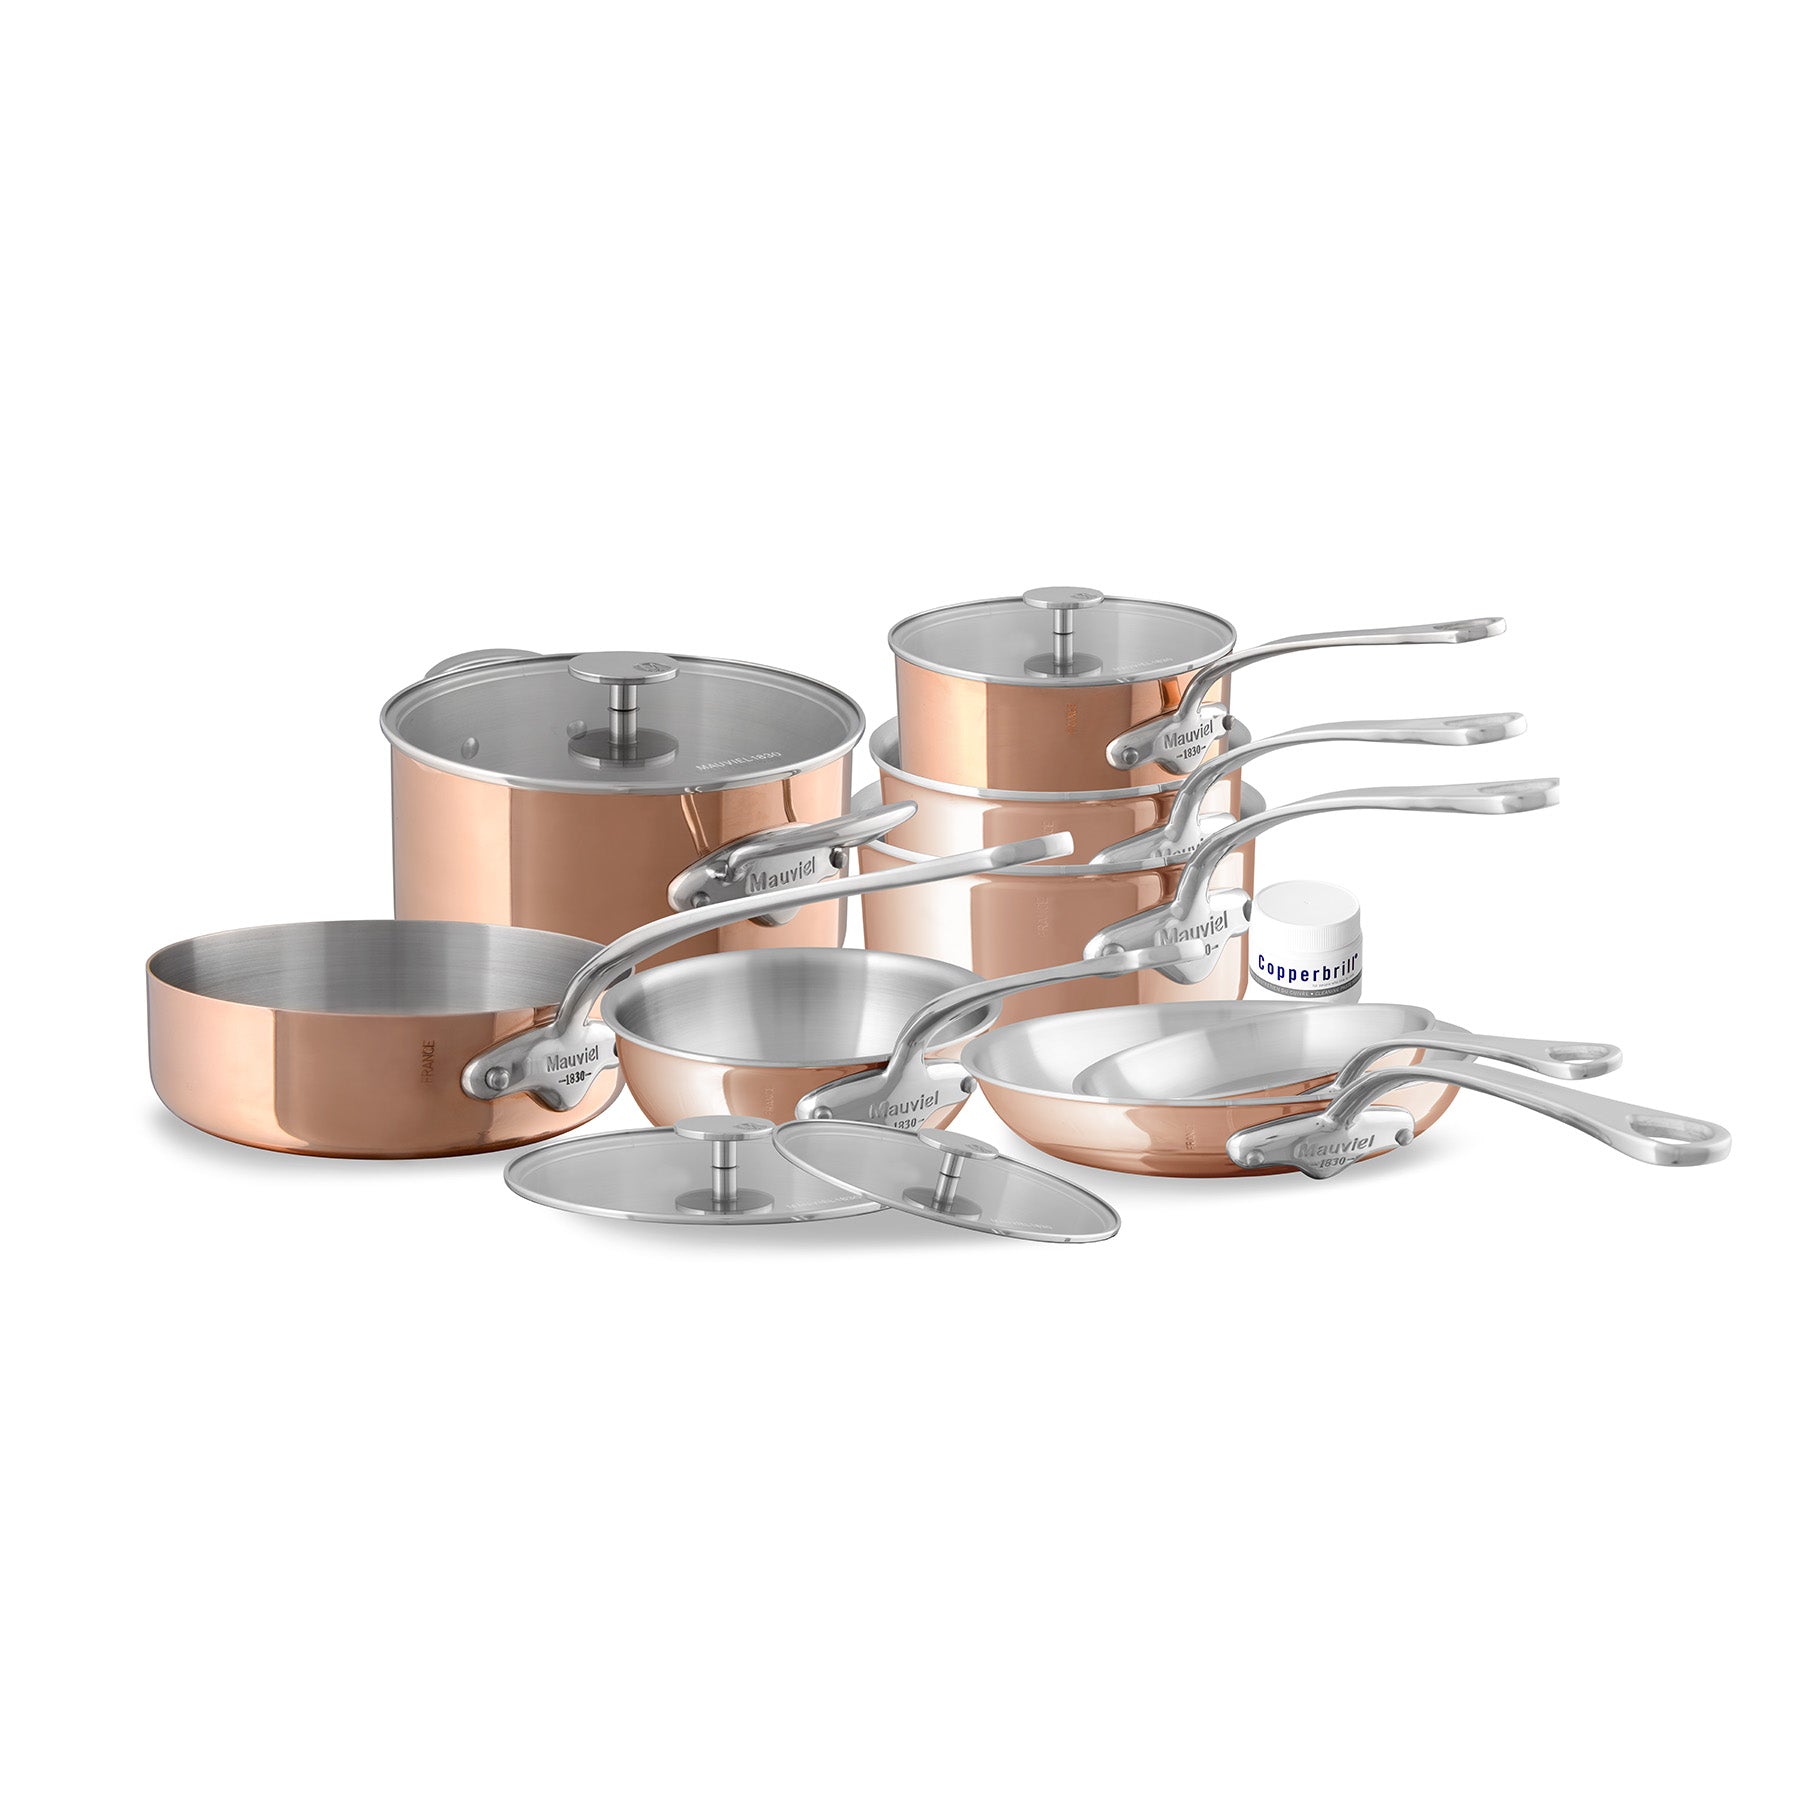 Made in USA Cookware - High Quality Stainless Steel Sets & Open Stock